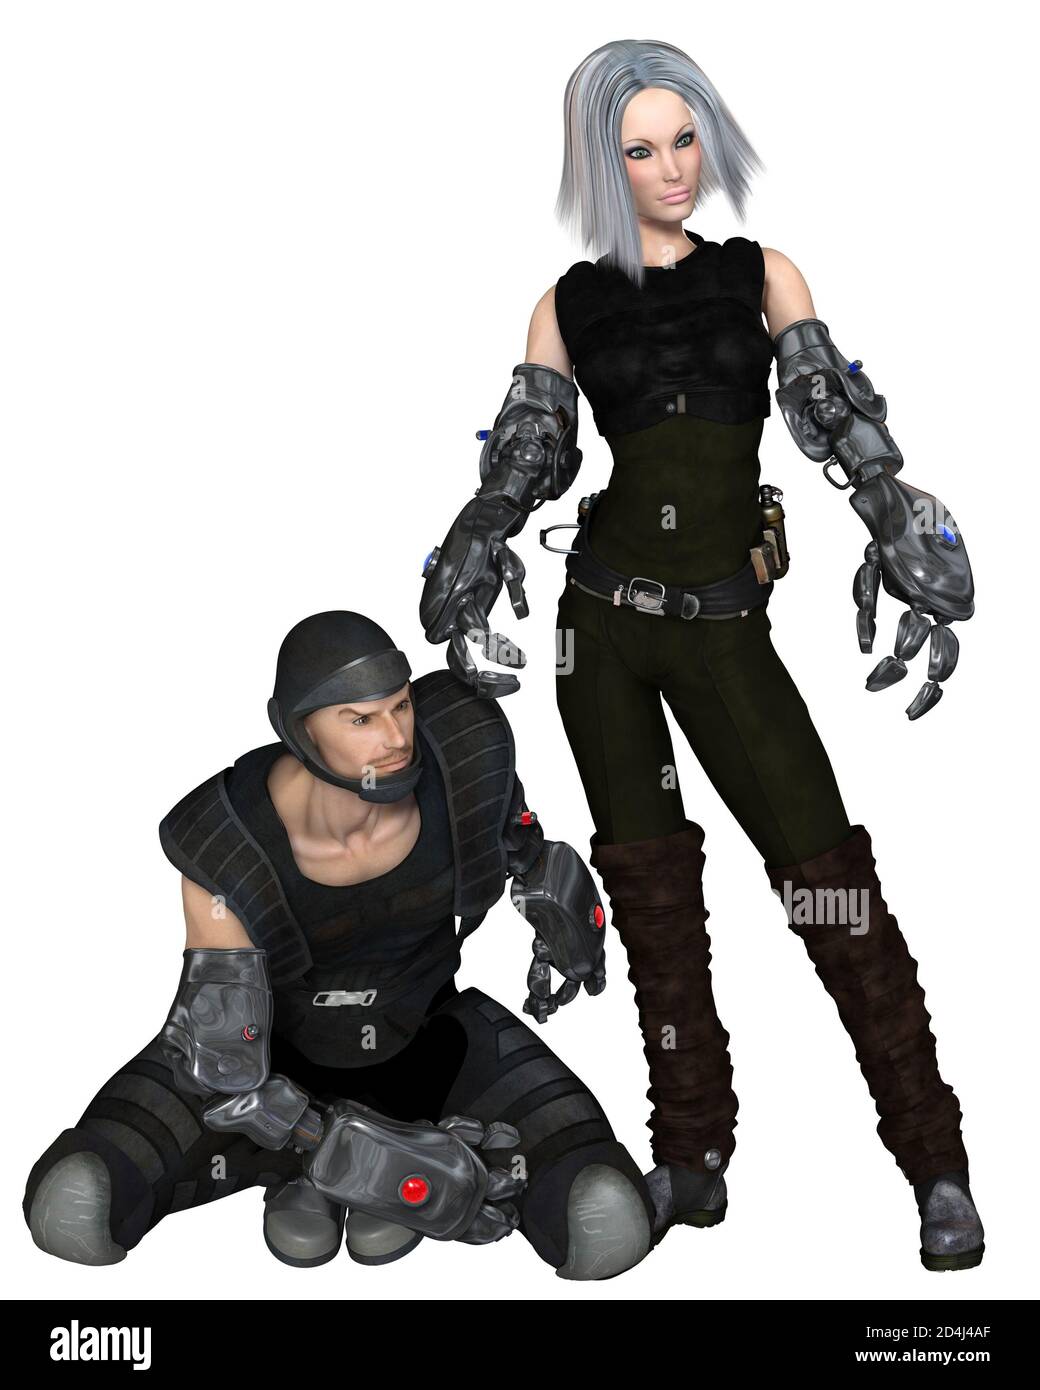 Male and Female Cyber Soldiers Waiting to Attack, 3d digitally rendered illustration Stock Photo